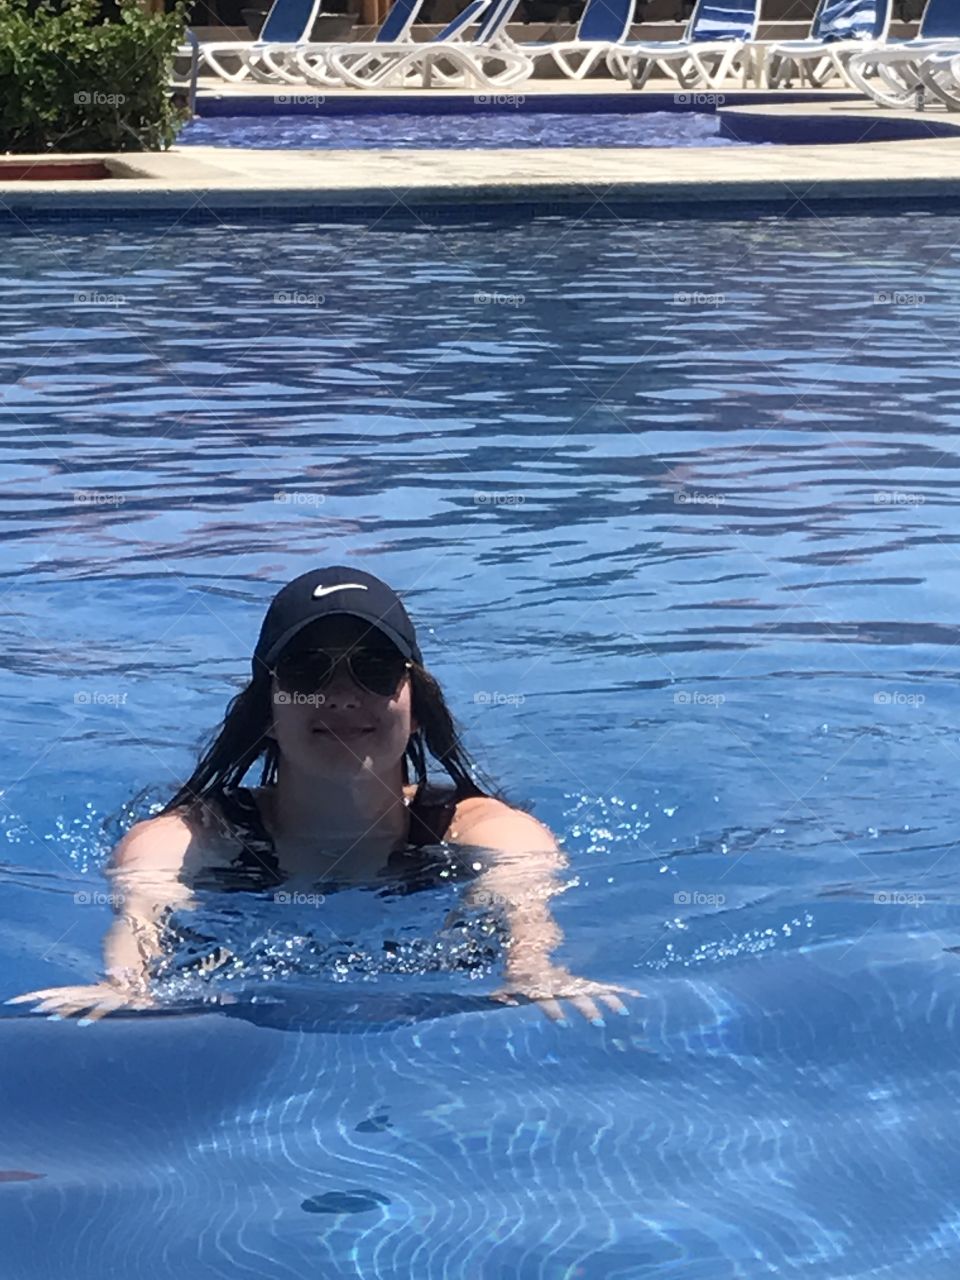 Cooling off in the beautiful resort pool